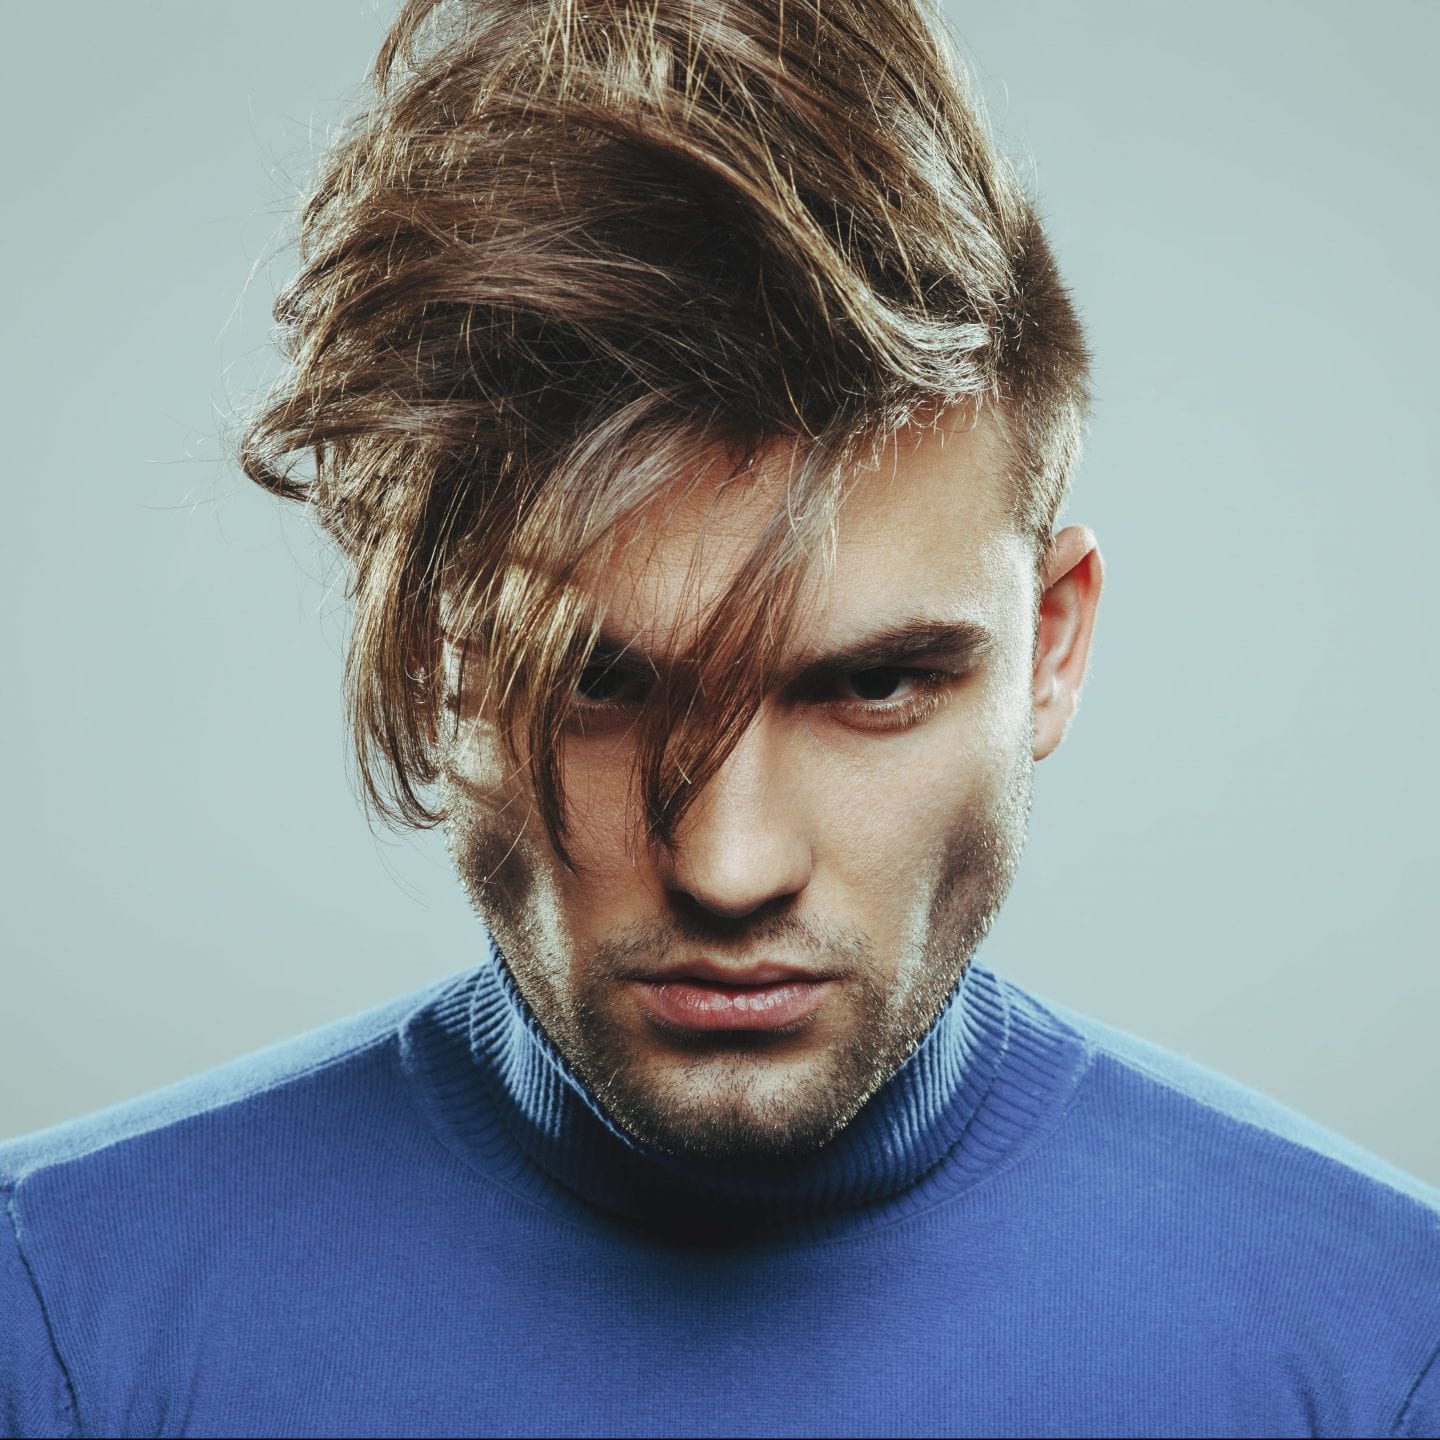 Hairstyles for Men | Haircut Inspiration